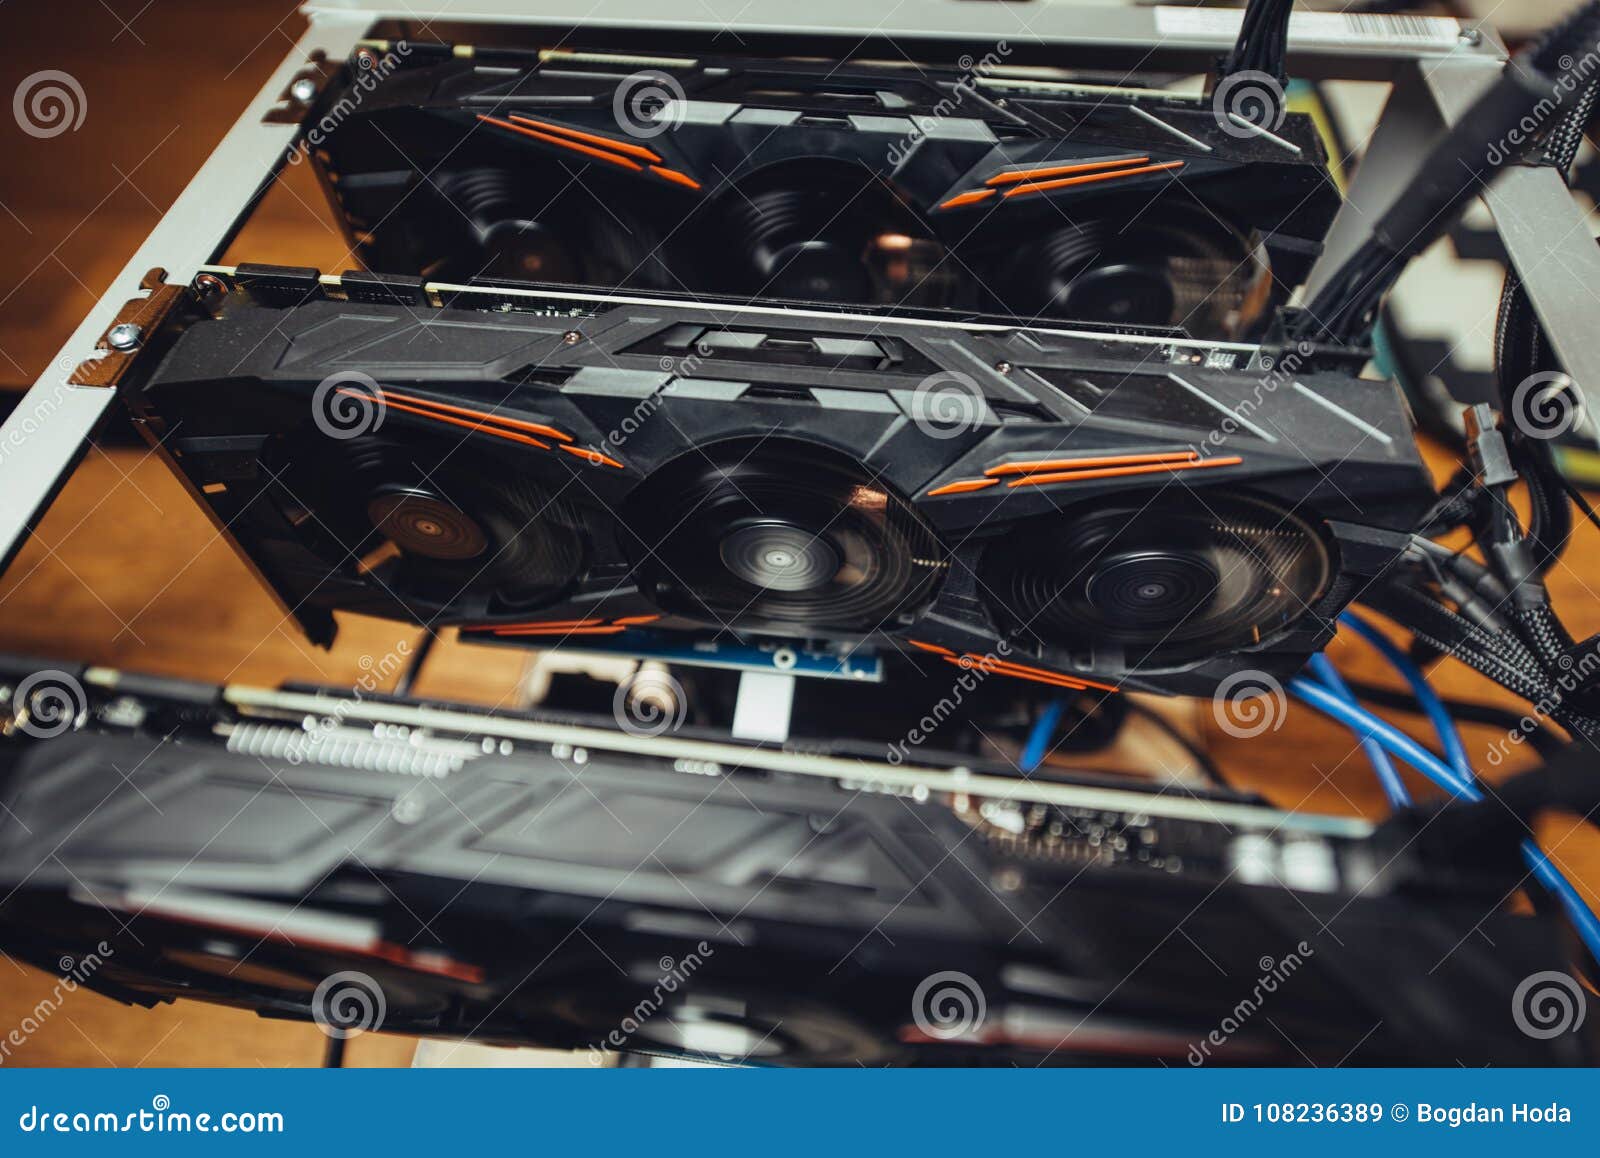 graphics cards mining rig used for mining online crypto currencies